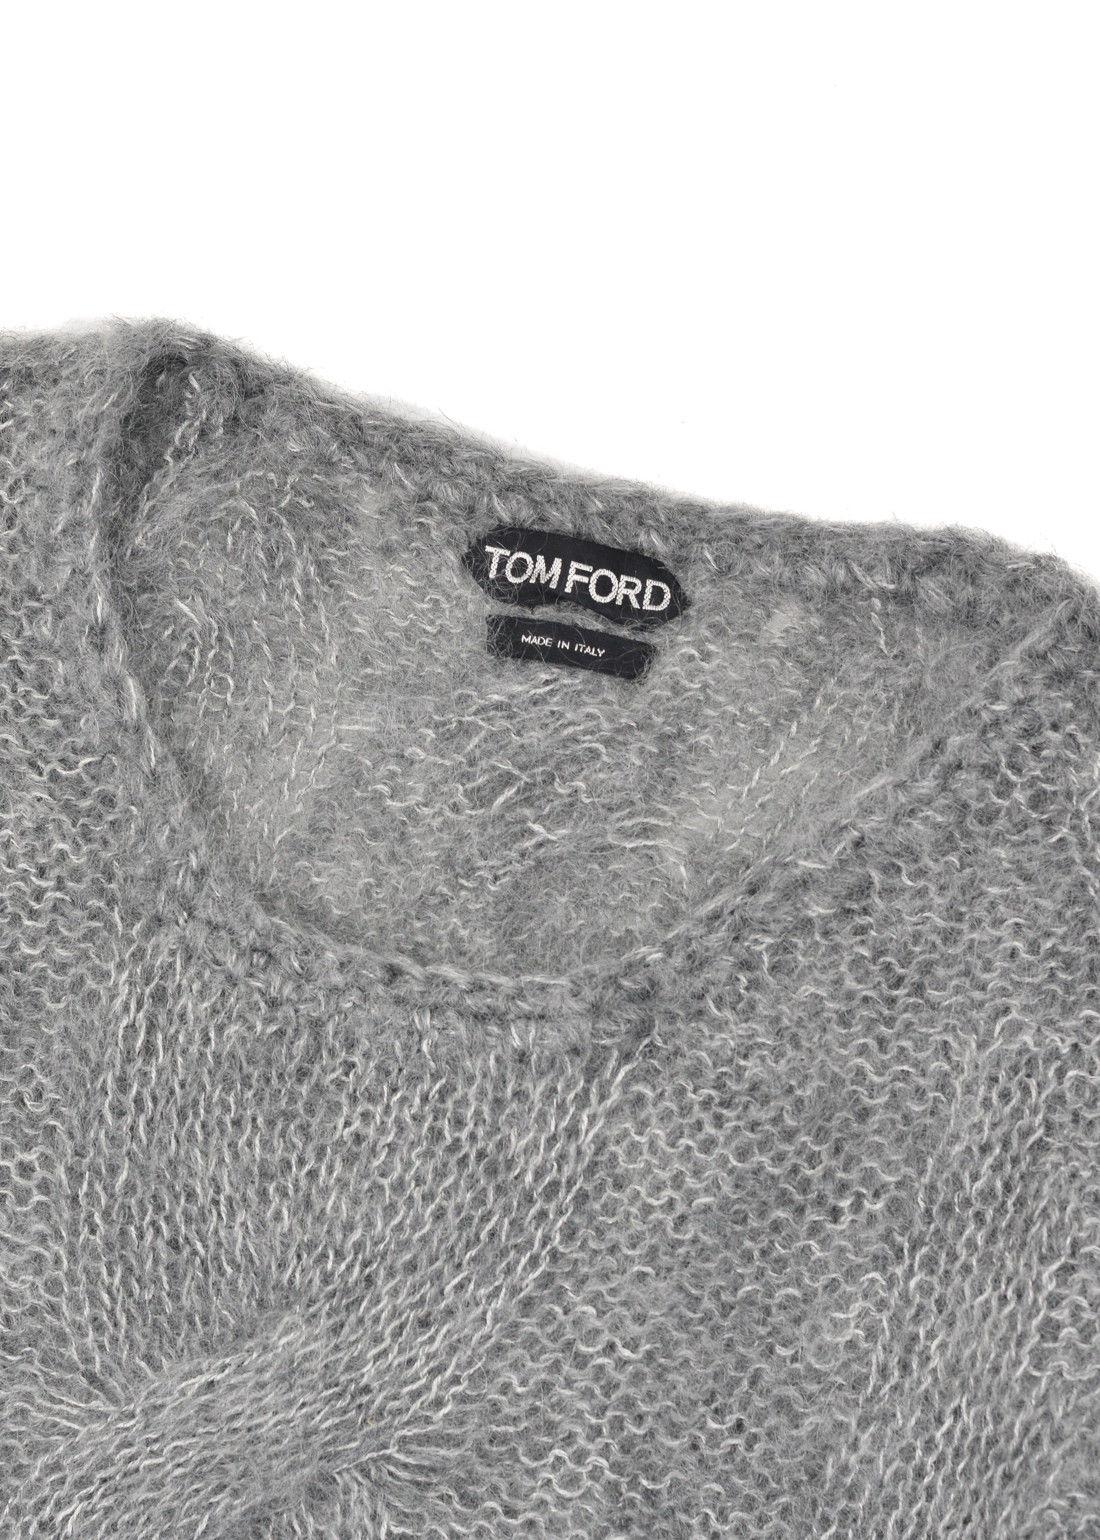 Tom Ford's luxurious crewneck sweater with a rib knit woven design. This classic Tom Ford crewneck sweater is crafted from soft mohair and silk for a gentle and luxurious feel to the skin. Perfect for this winter and fall season, pair with regular